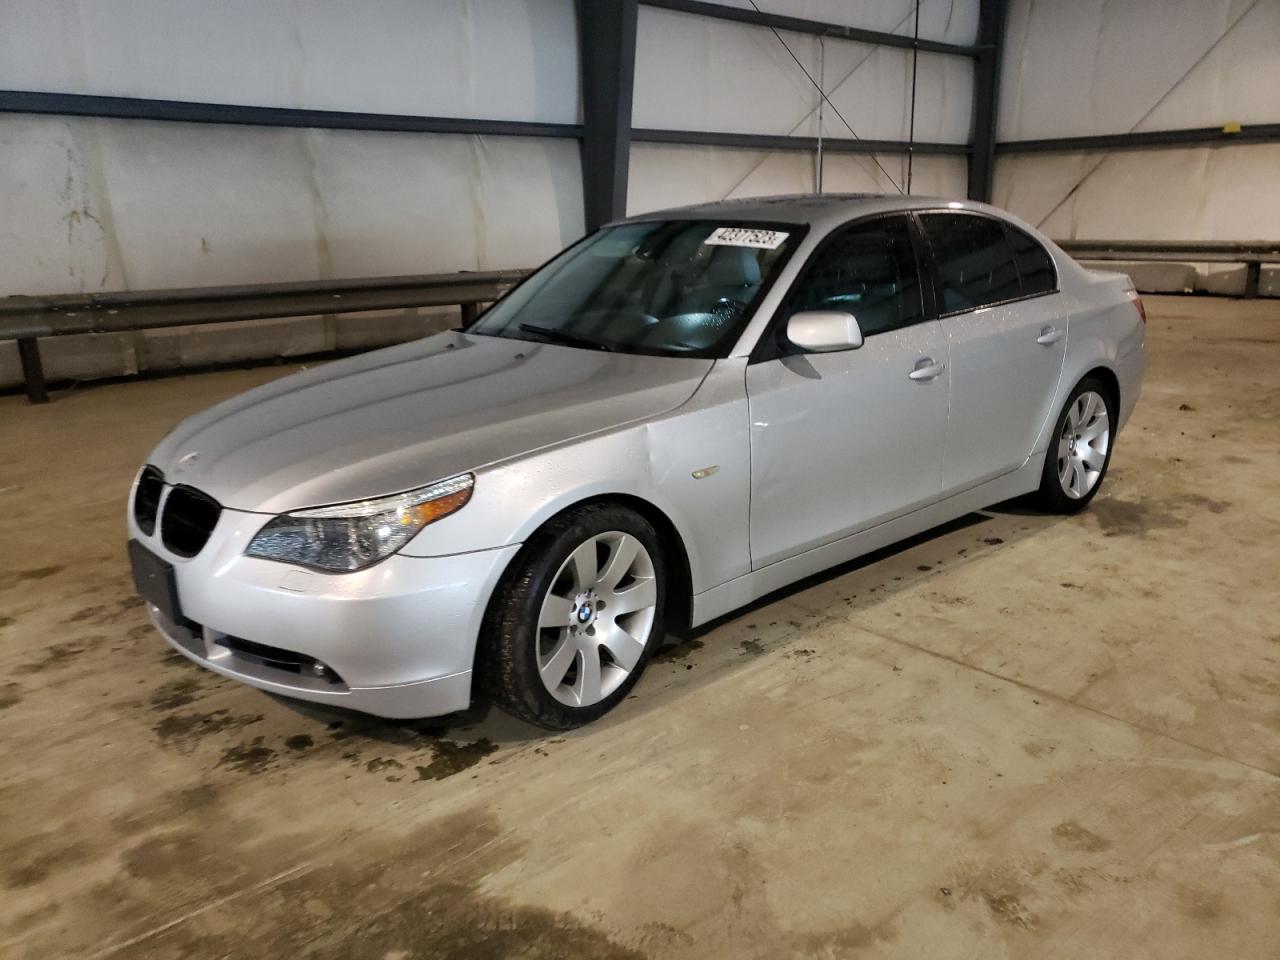 2005 BMW 530 I for sale at Copart Graham, WA Lot #42377*** |  SalvageReseller.com